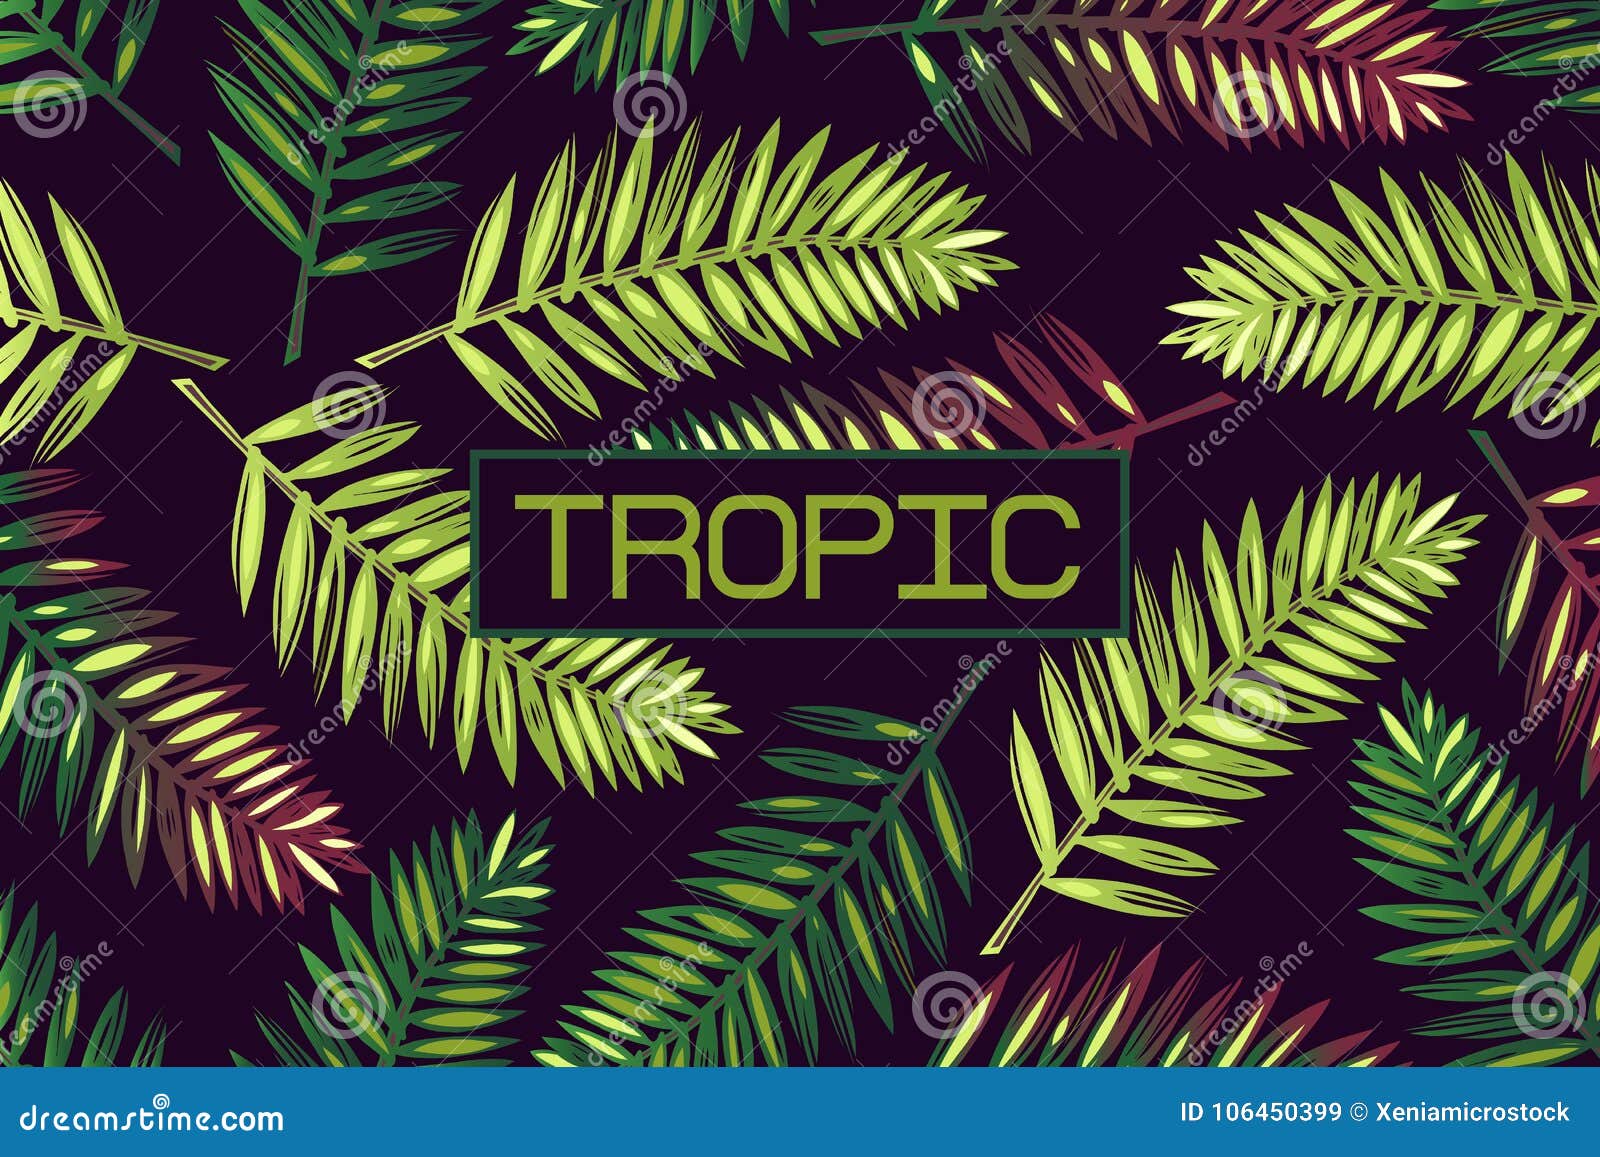 background with palm leaves and the word `tropic`. lettering tropics border exotics.